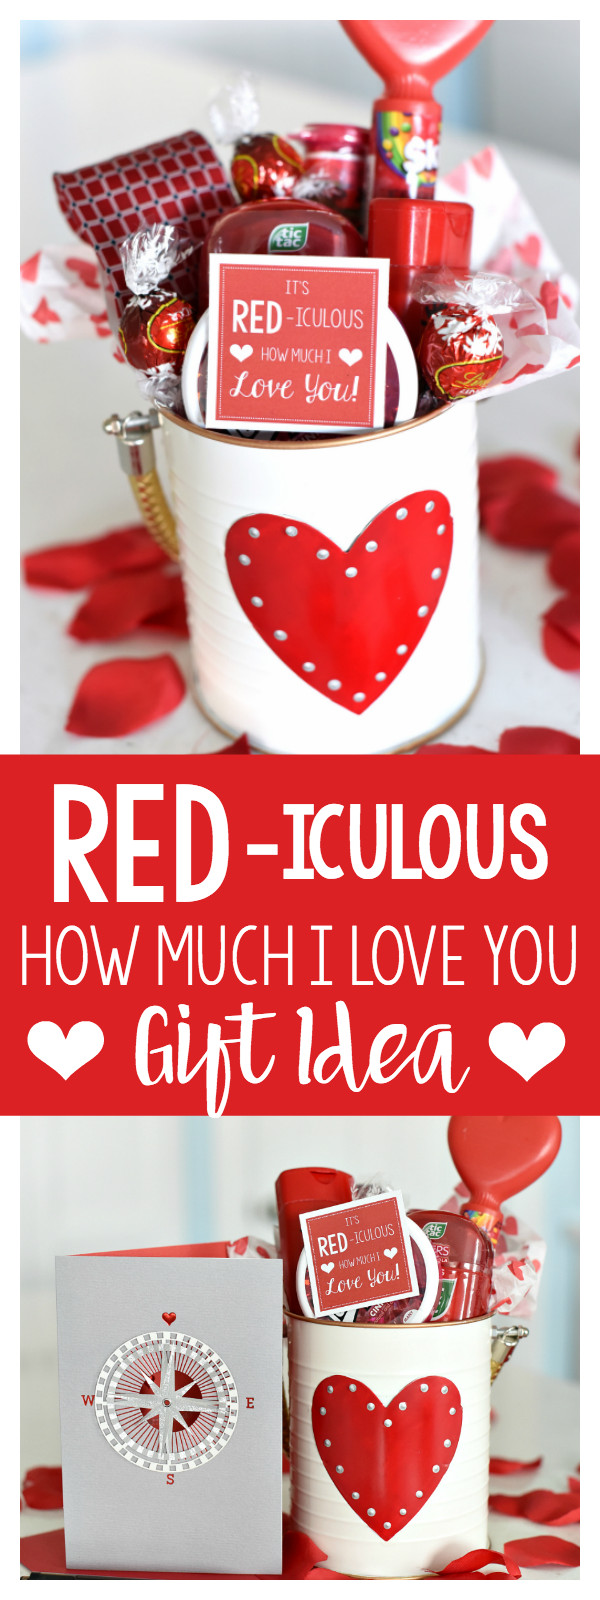 Valentine'S Day Gift Box Ideas
 Cute Valentine s Day Gift Idea RED iculous Basket